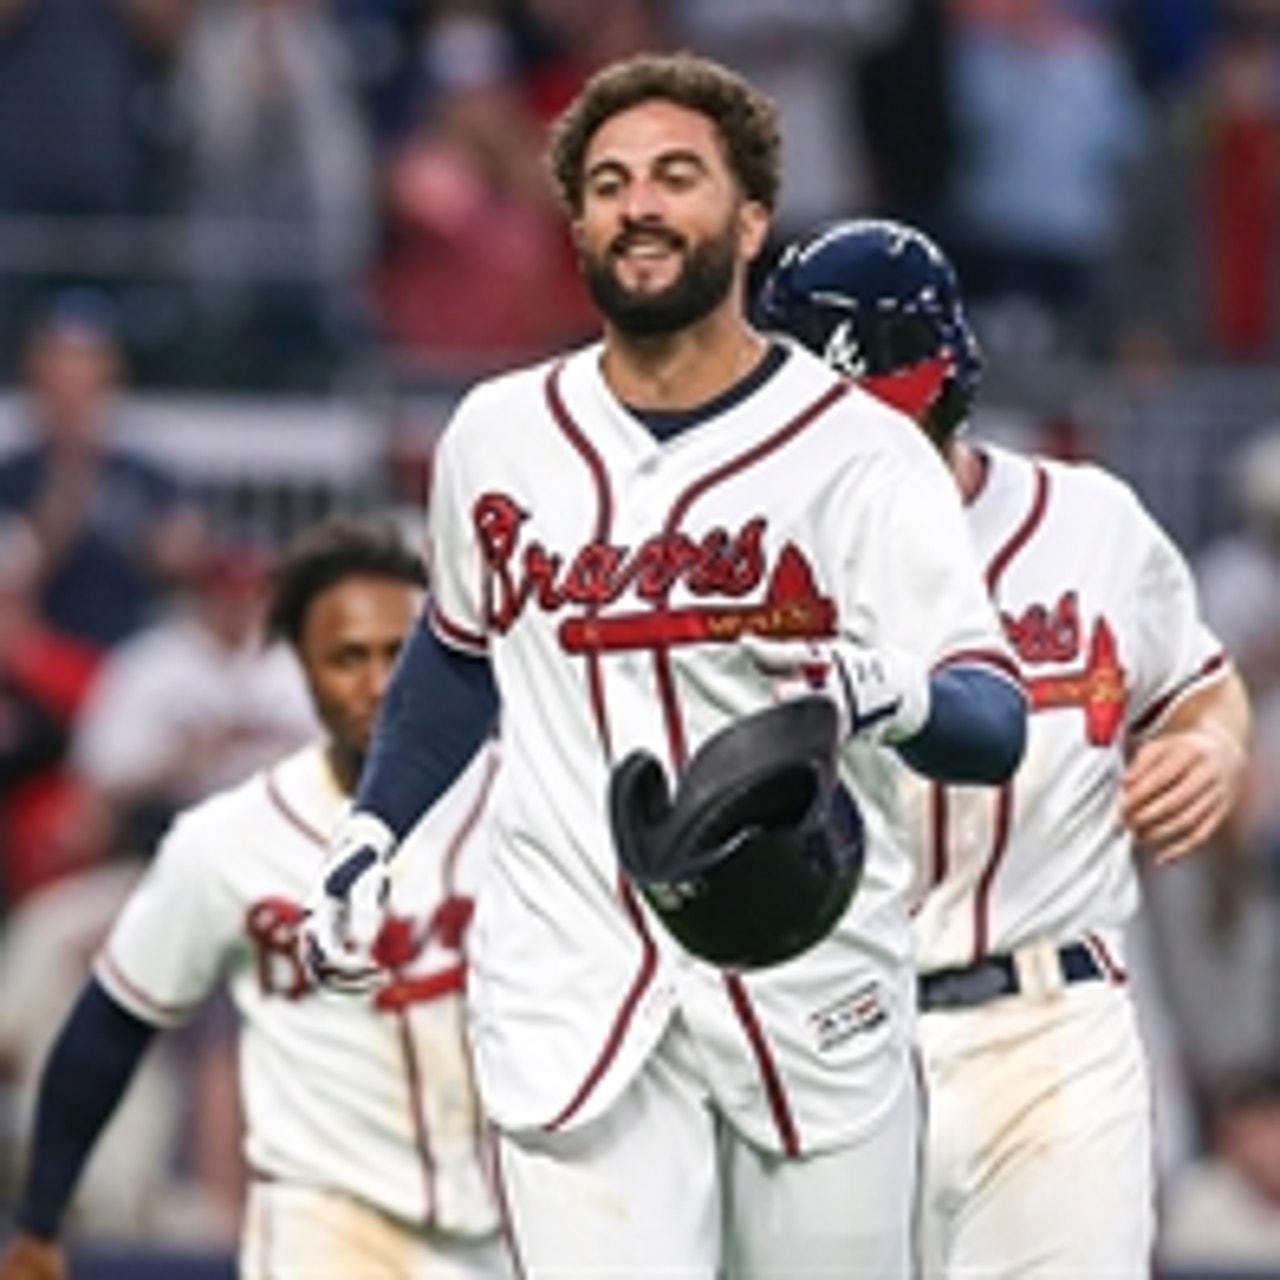 Nick Markakis homers again, off to big start for first-place Braves